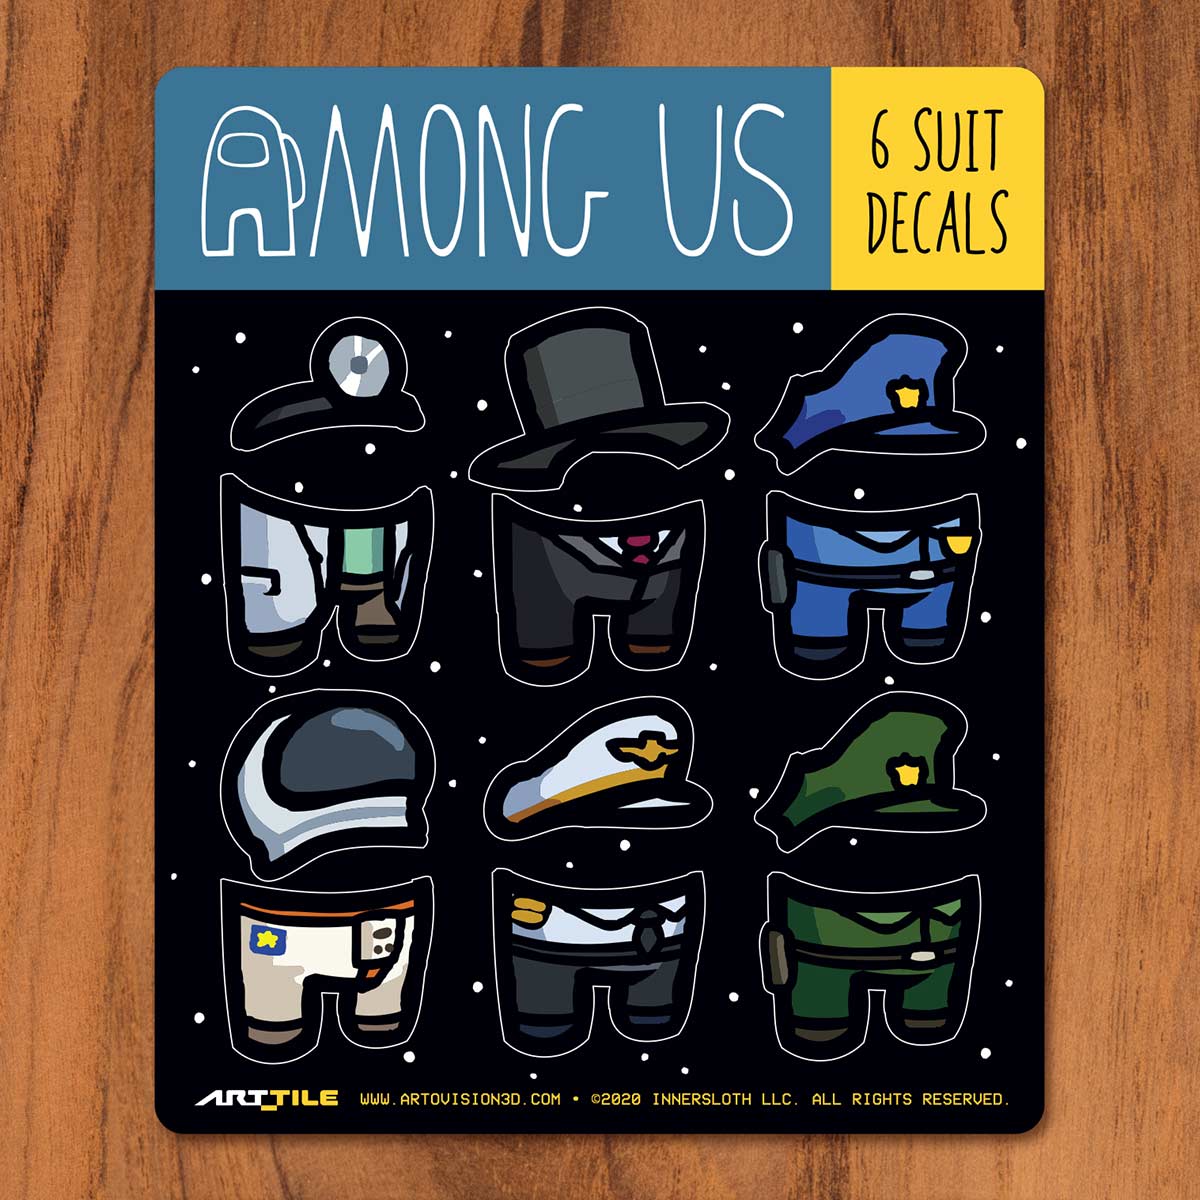 Among Us: Art Tile Crewmate Decals - Skins